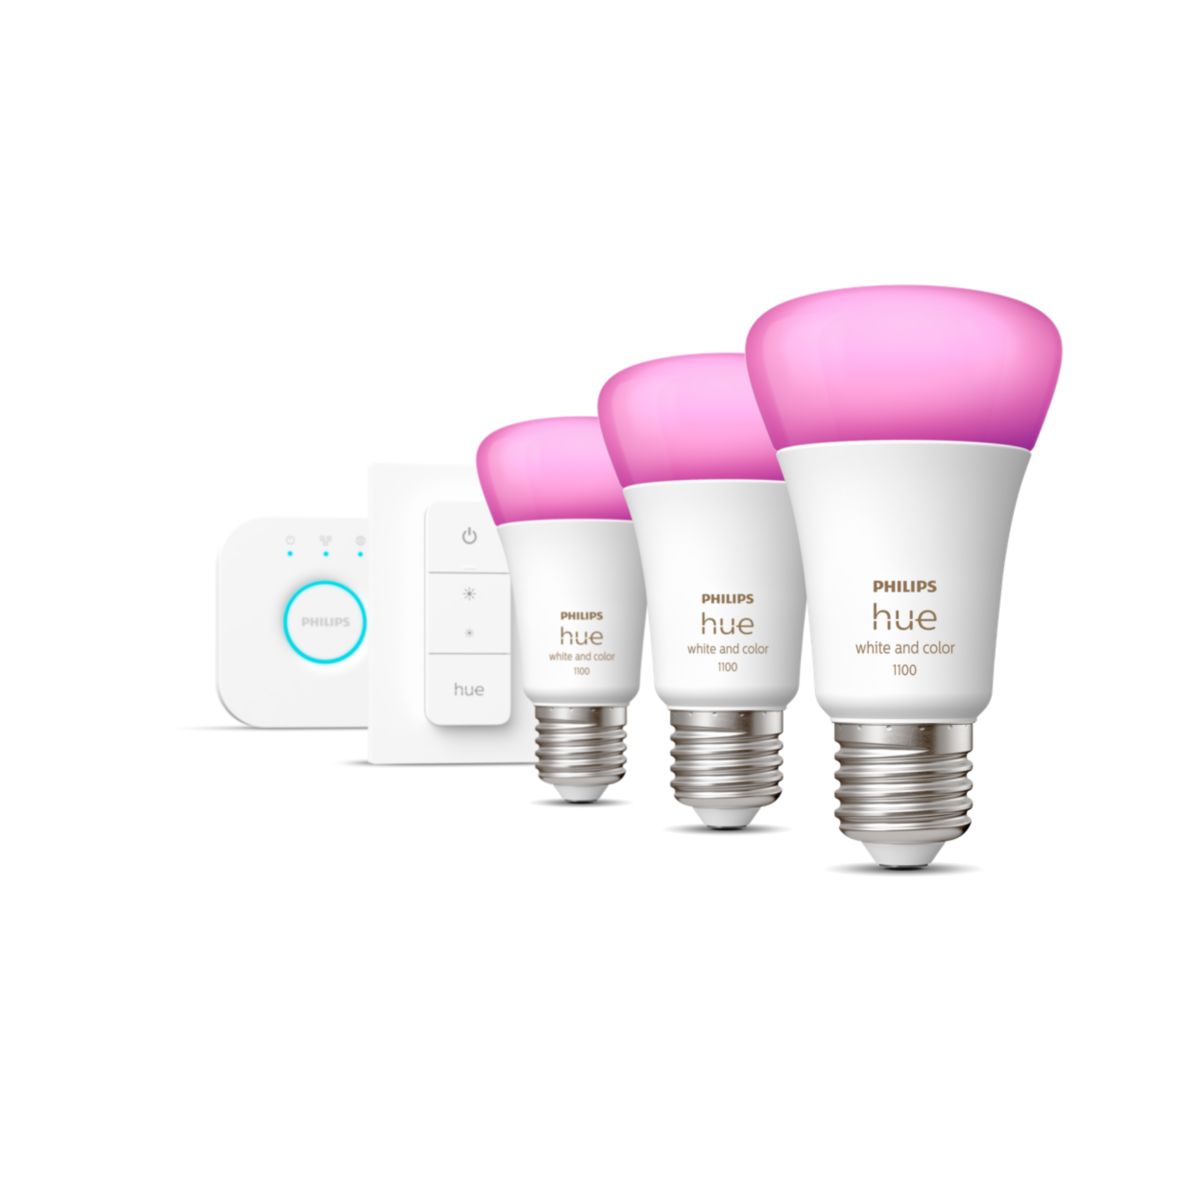 Philips Hue starterkit e27 white ambiance and color 1100lm 3x + dimmer switch